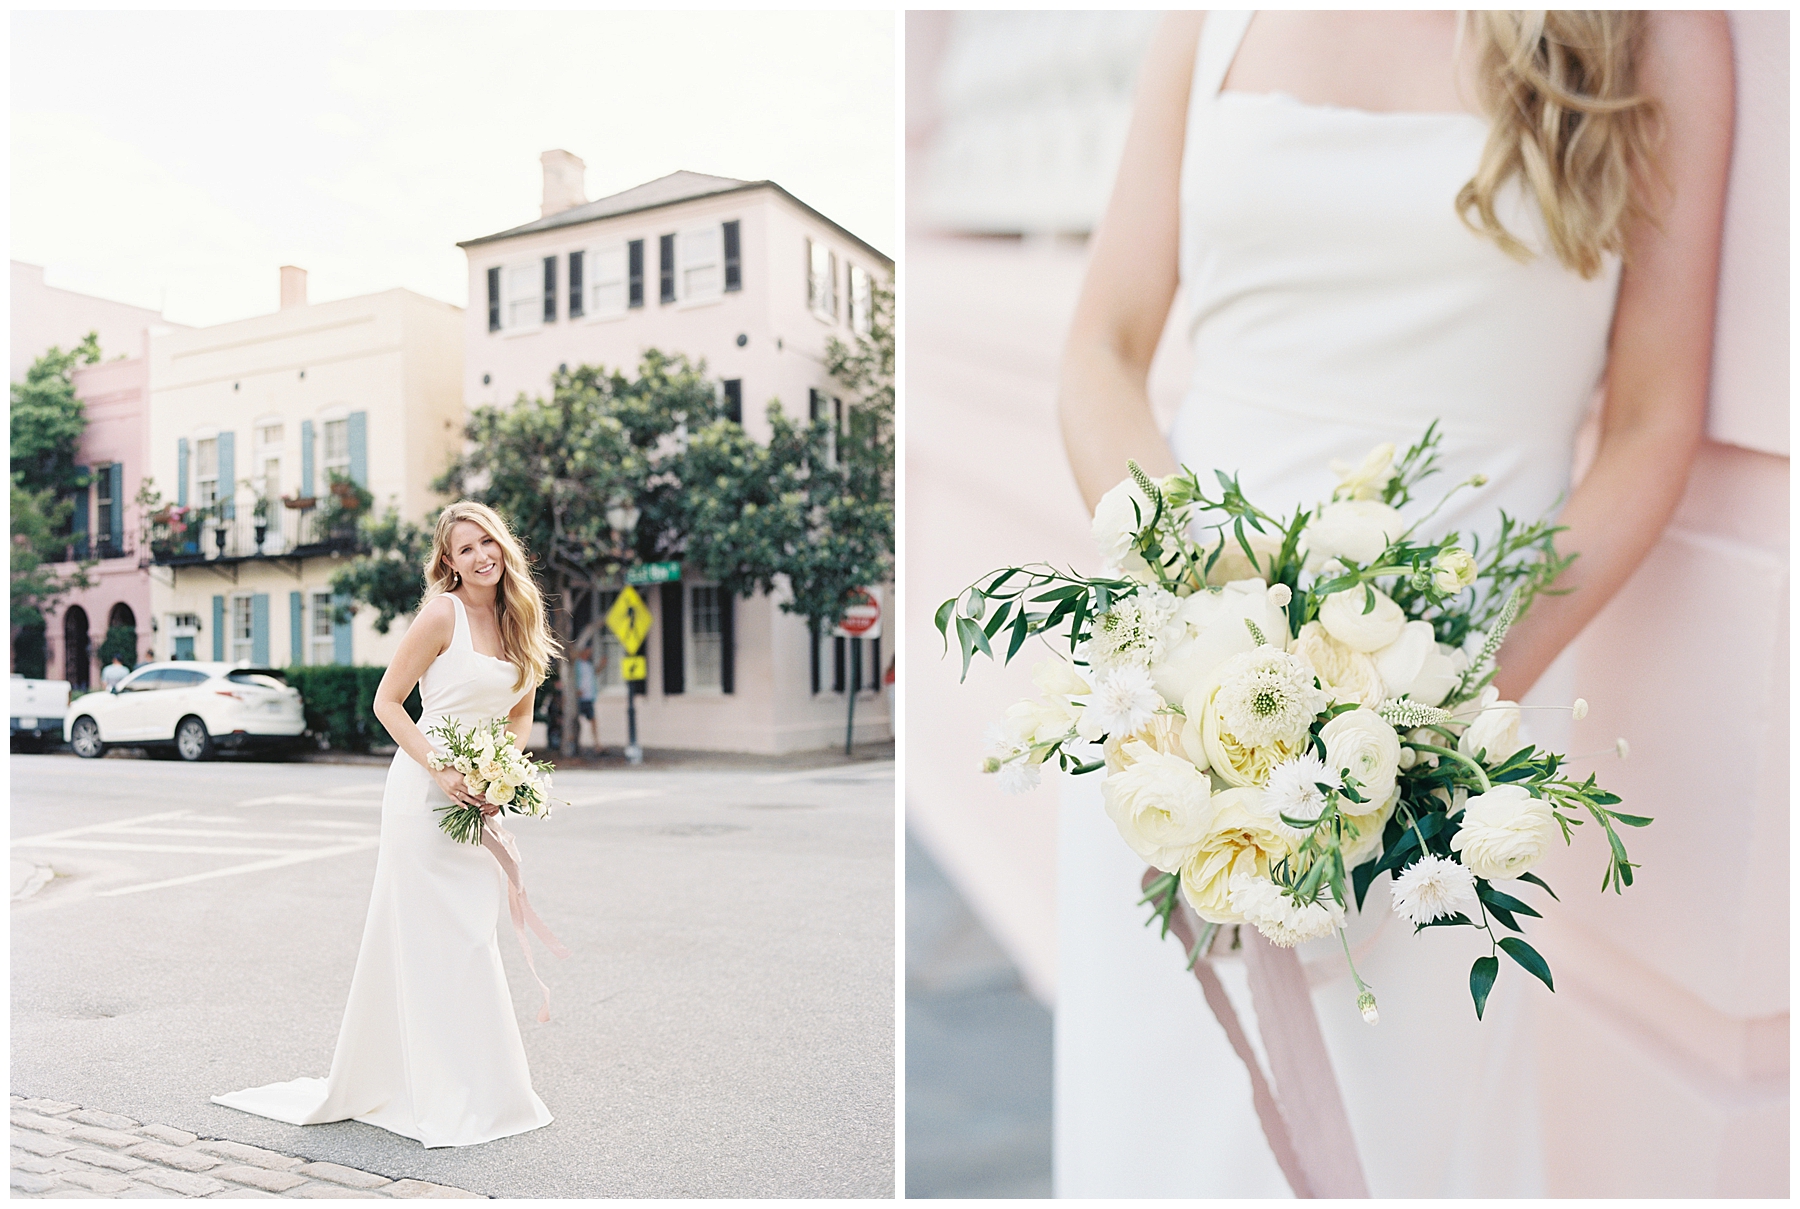 Bride in wedding dress with classic white bouquet